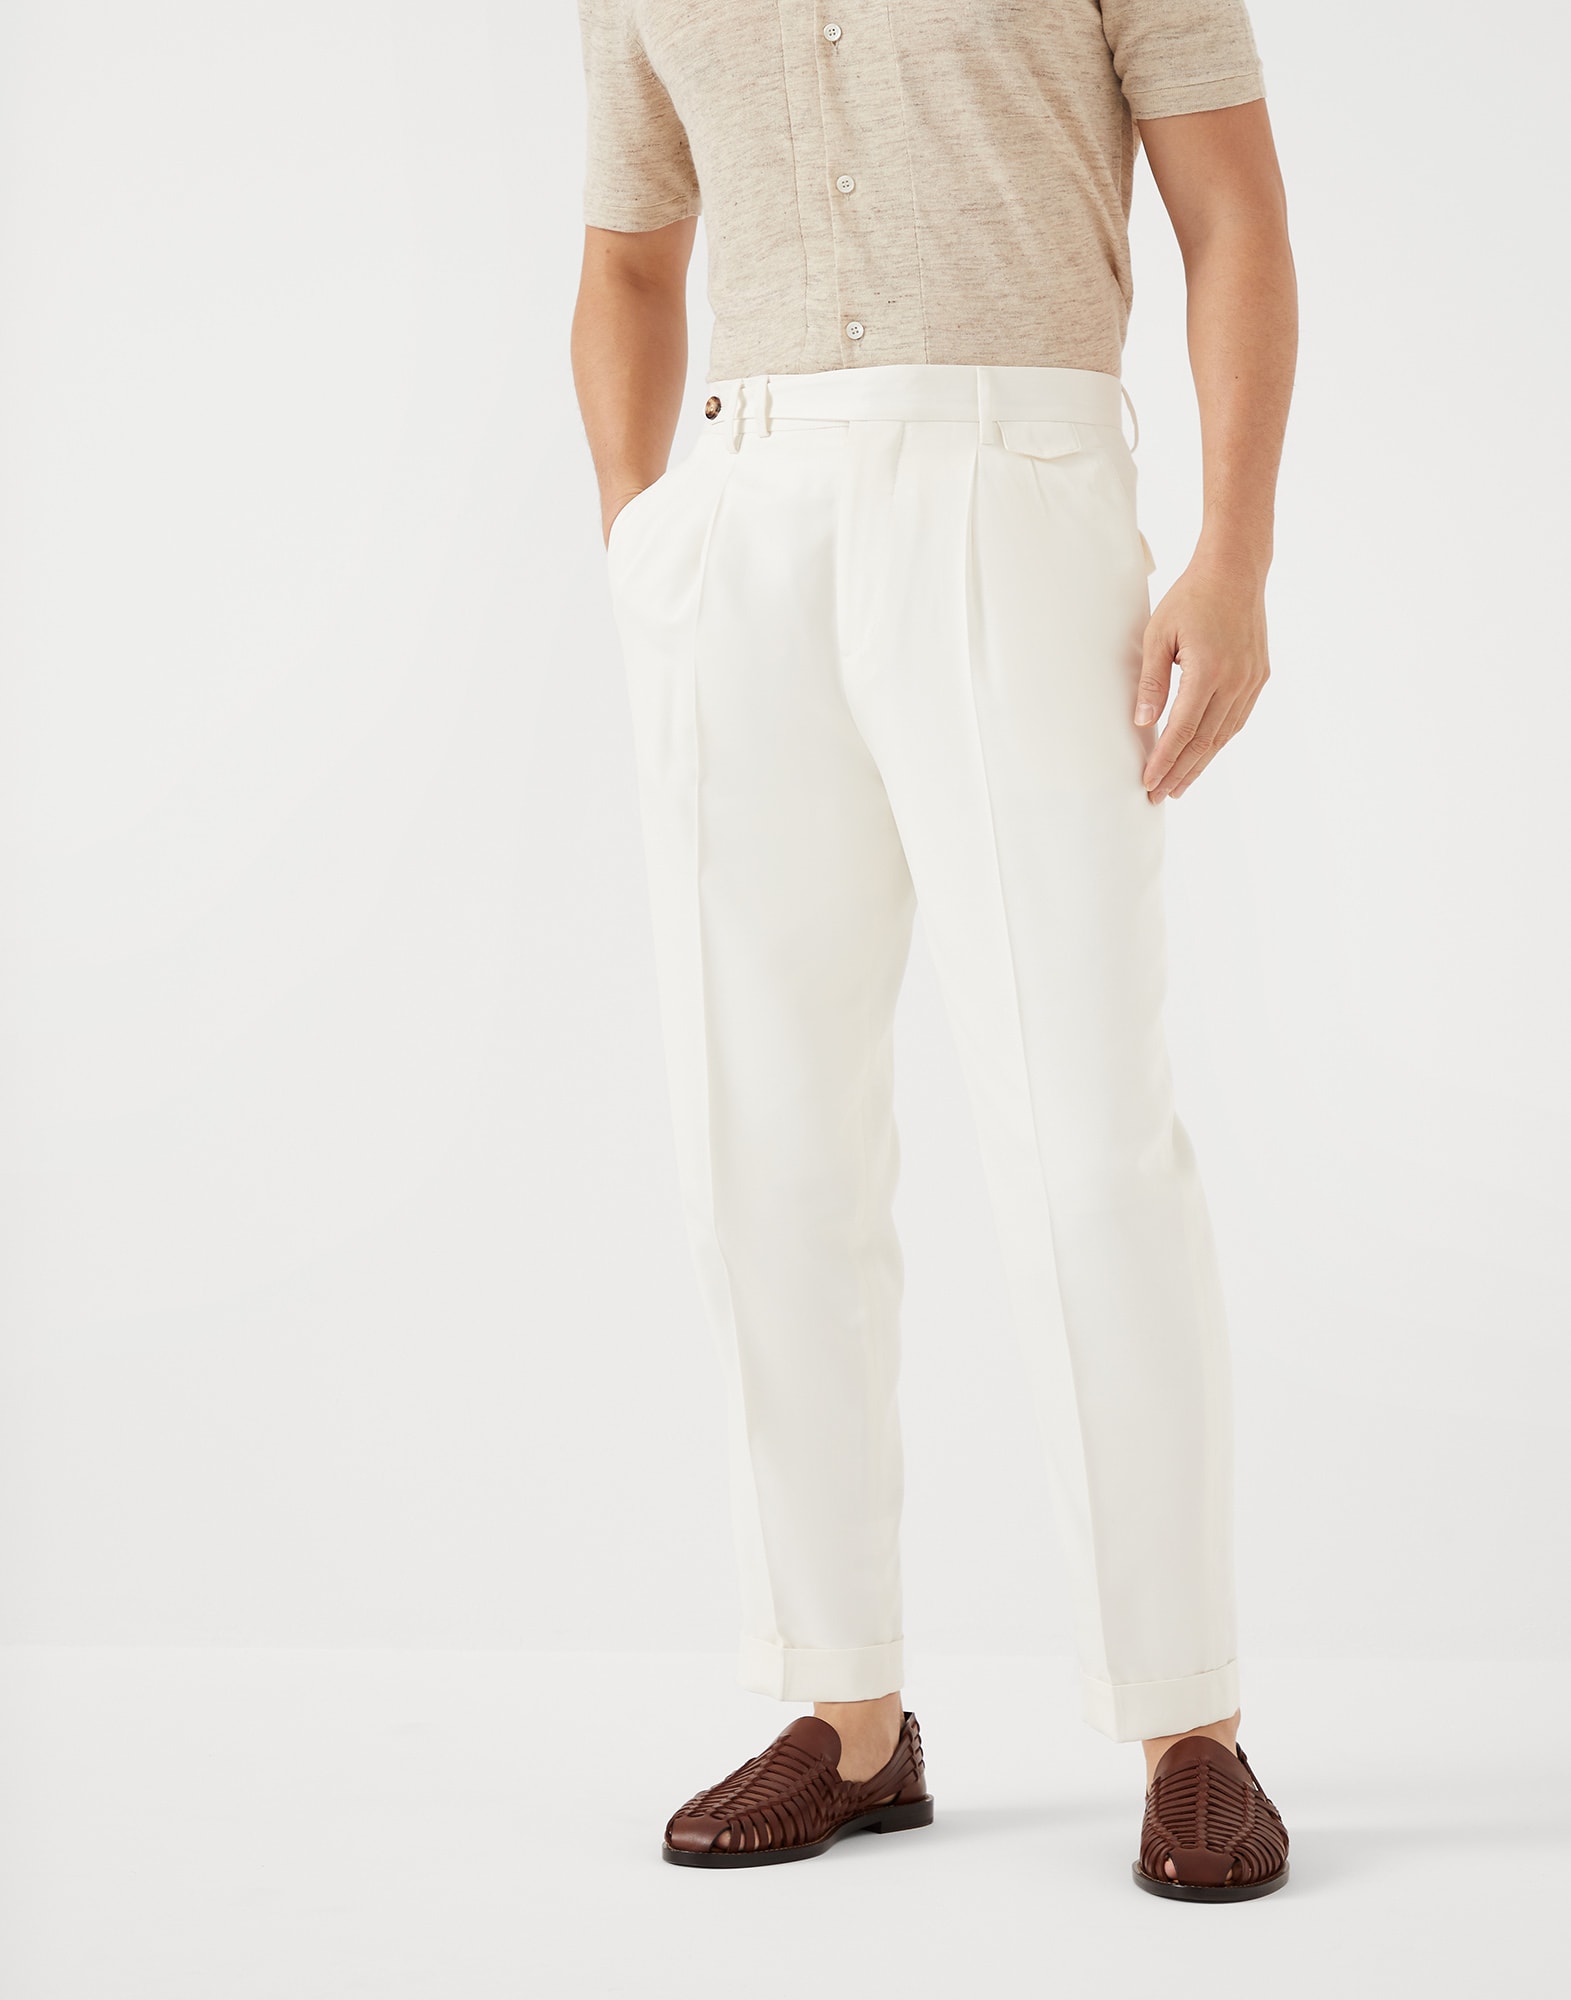 Leisure fit trousers with double pleats Off-White Man - Brunello Cucinelli